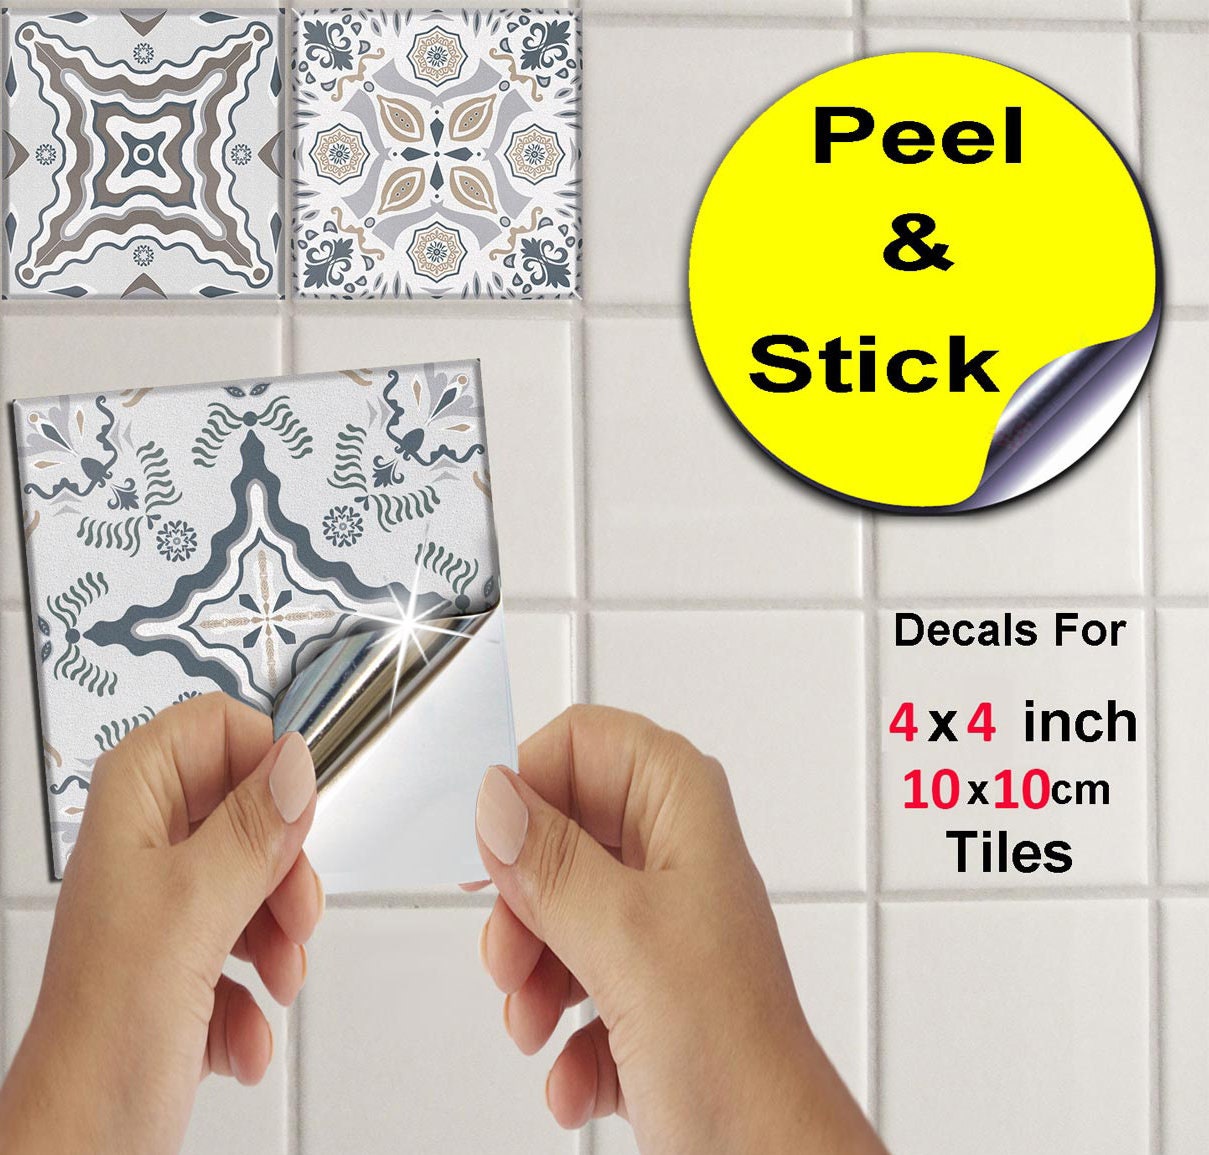 4x4 Wall Tile Stickers, Self Adhesive, SOLID / THICK, Stick on